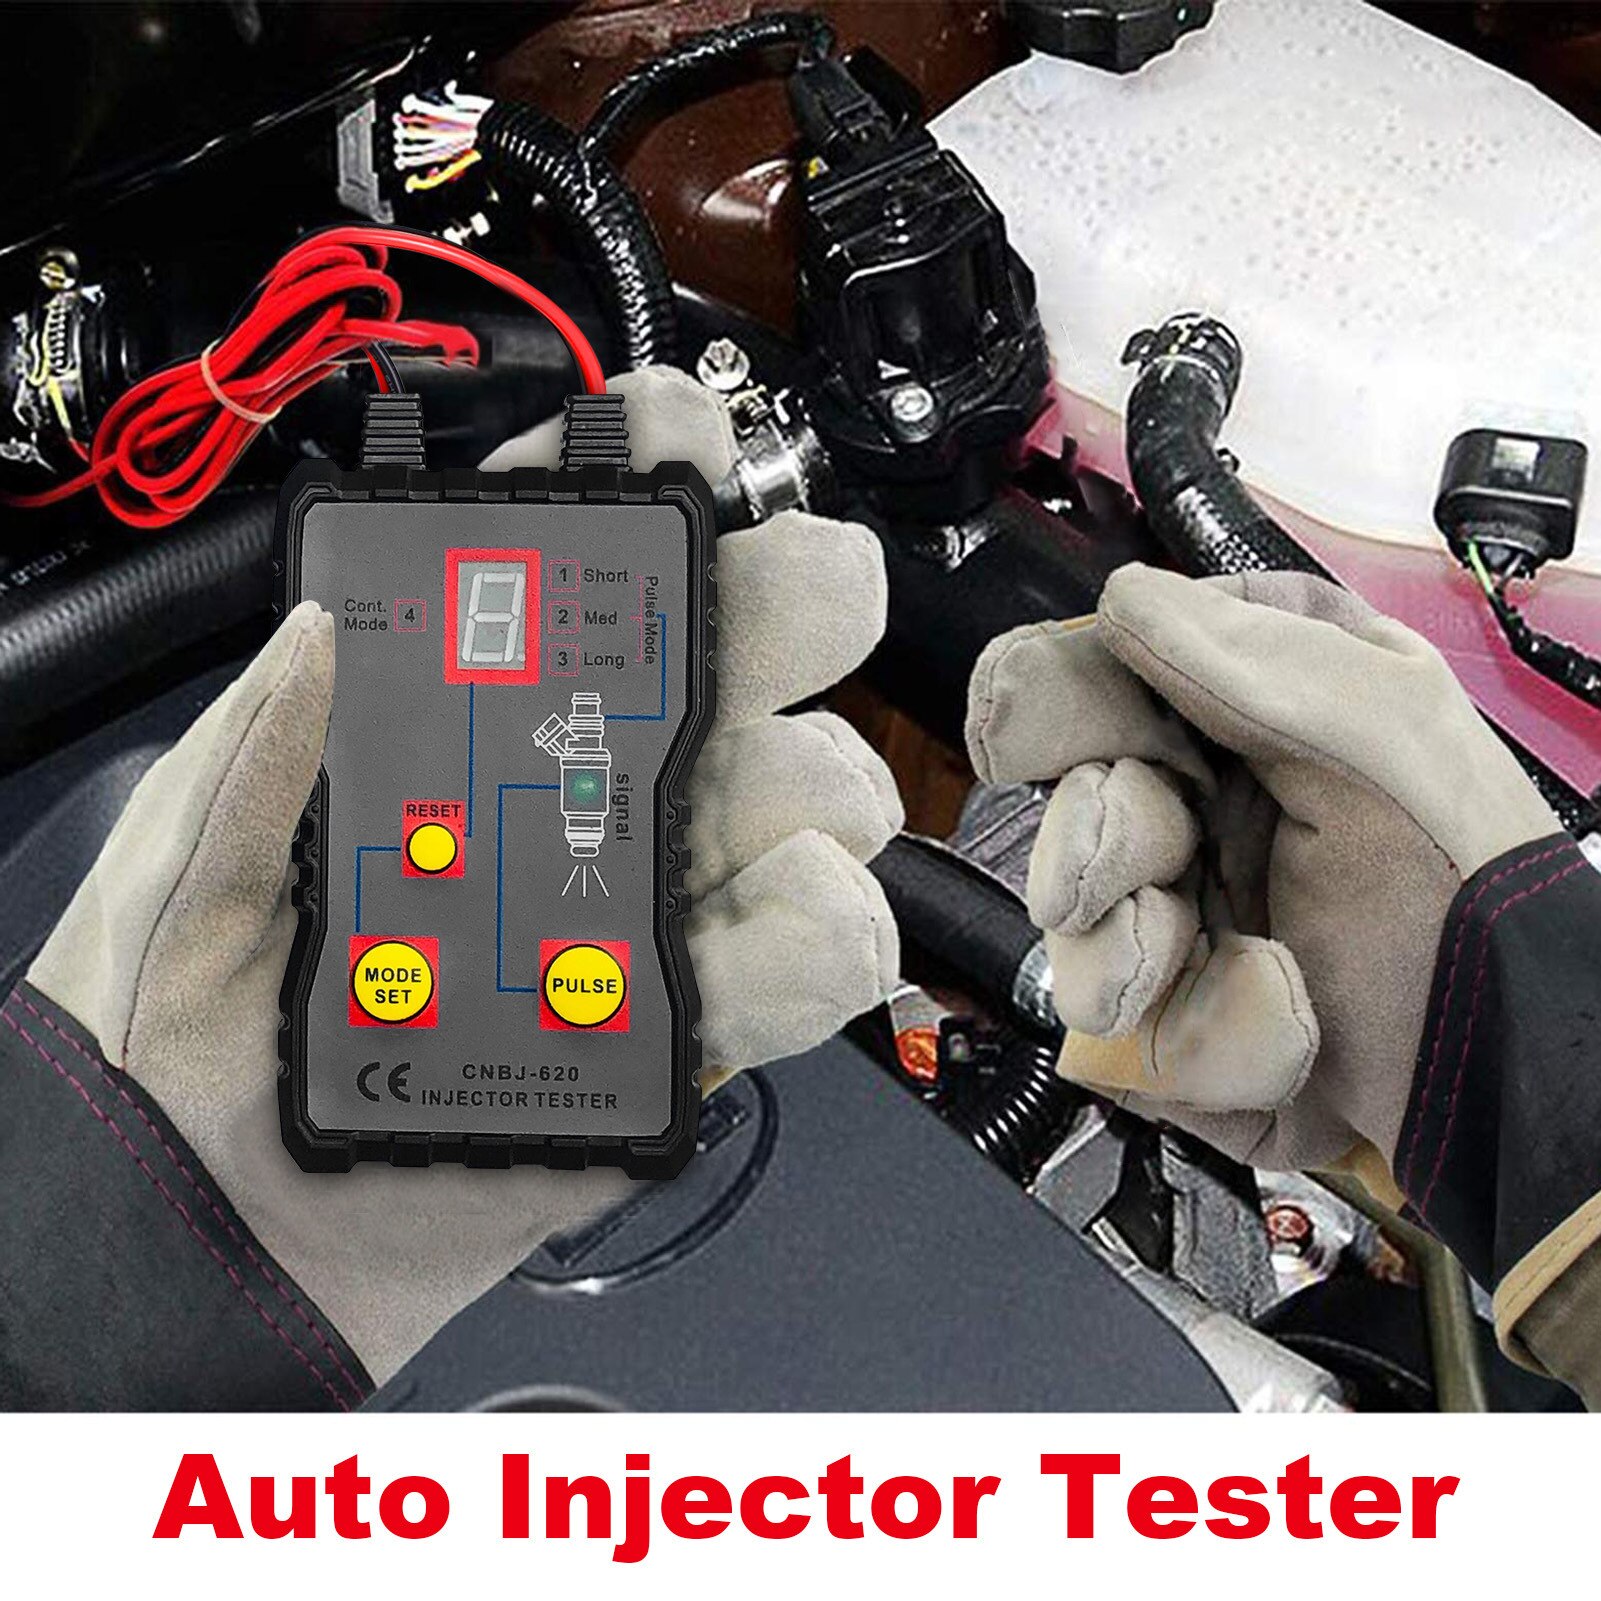 CNBJ-620 12V Auto Injector Tester Fuel Injector Tester Fuel Injector Flush Cleaner Adapter Car Motorcycle Fuel Injectors